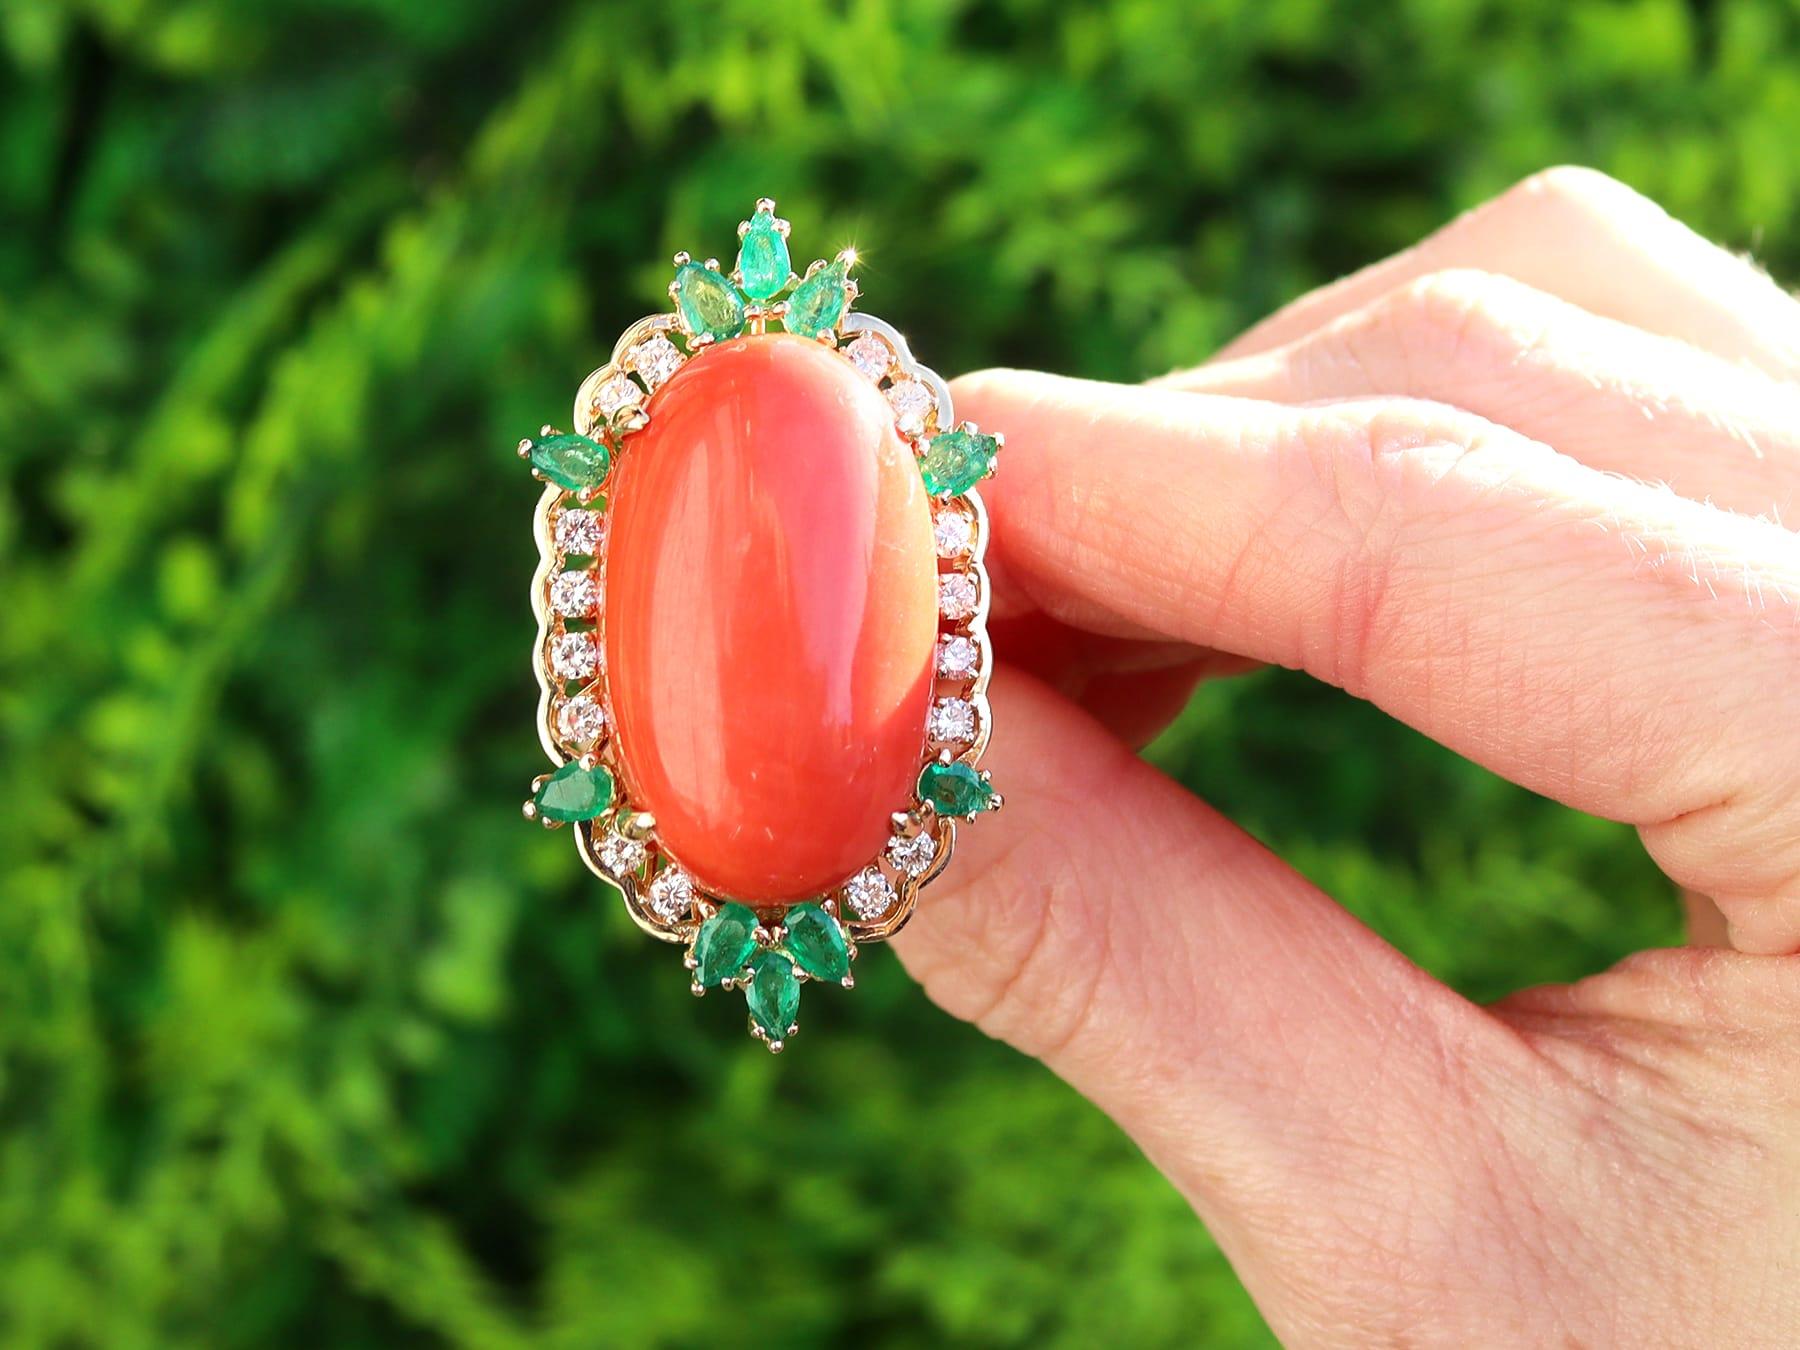 A stunning and unusual vintage 1960's 35.56 carat coral, 2.20 carat emerald and 0.86 carat diamond, 15 karat yellow gold combination dress ring and pendant; part of our diverse vintage jewellery and estate jewelry collections.

This stunning, fine